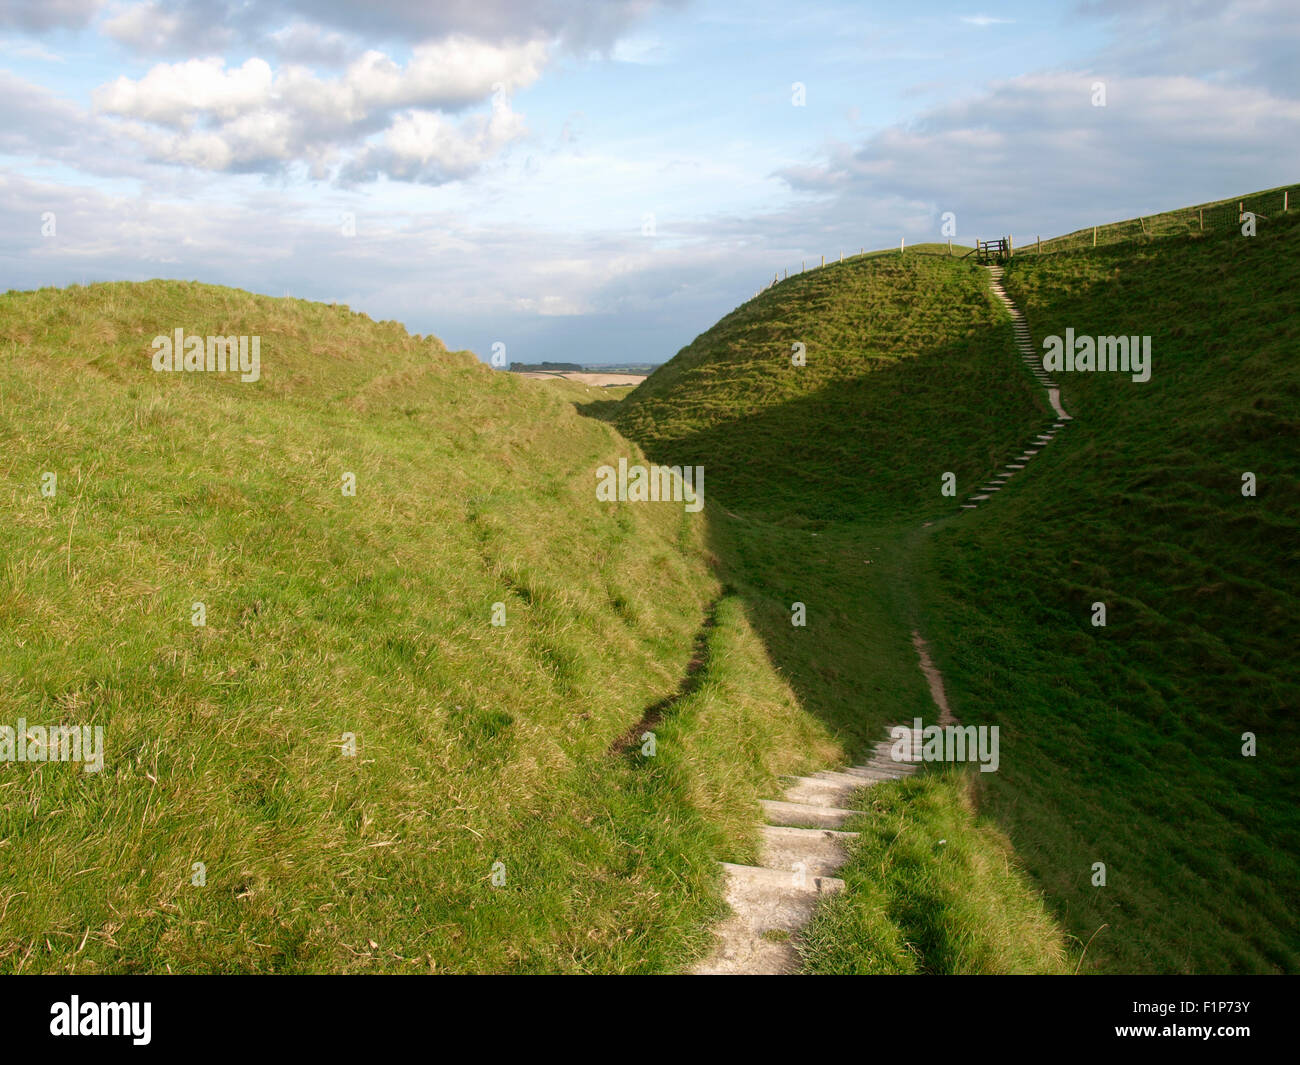 Footpath between ramparts, Maiden Castle, Iron age hill fort, Dorchester, Dorset, UK Stock Photo